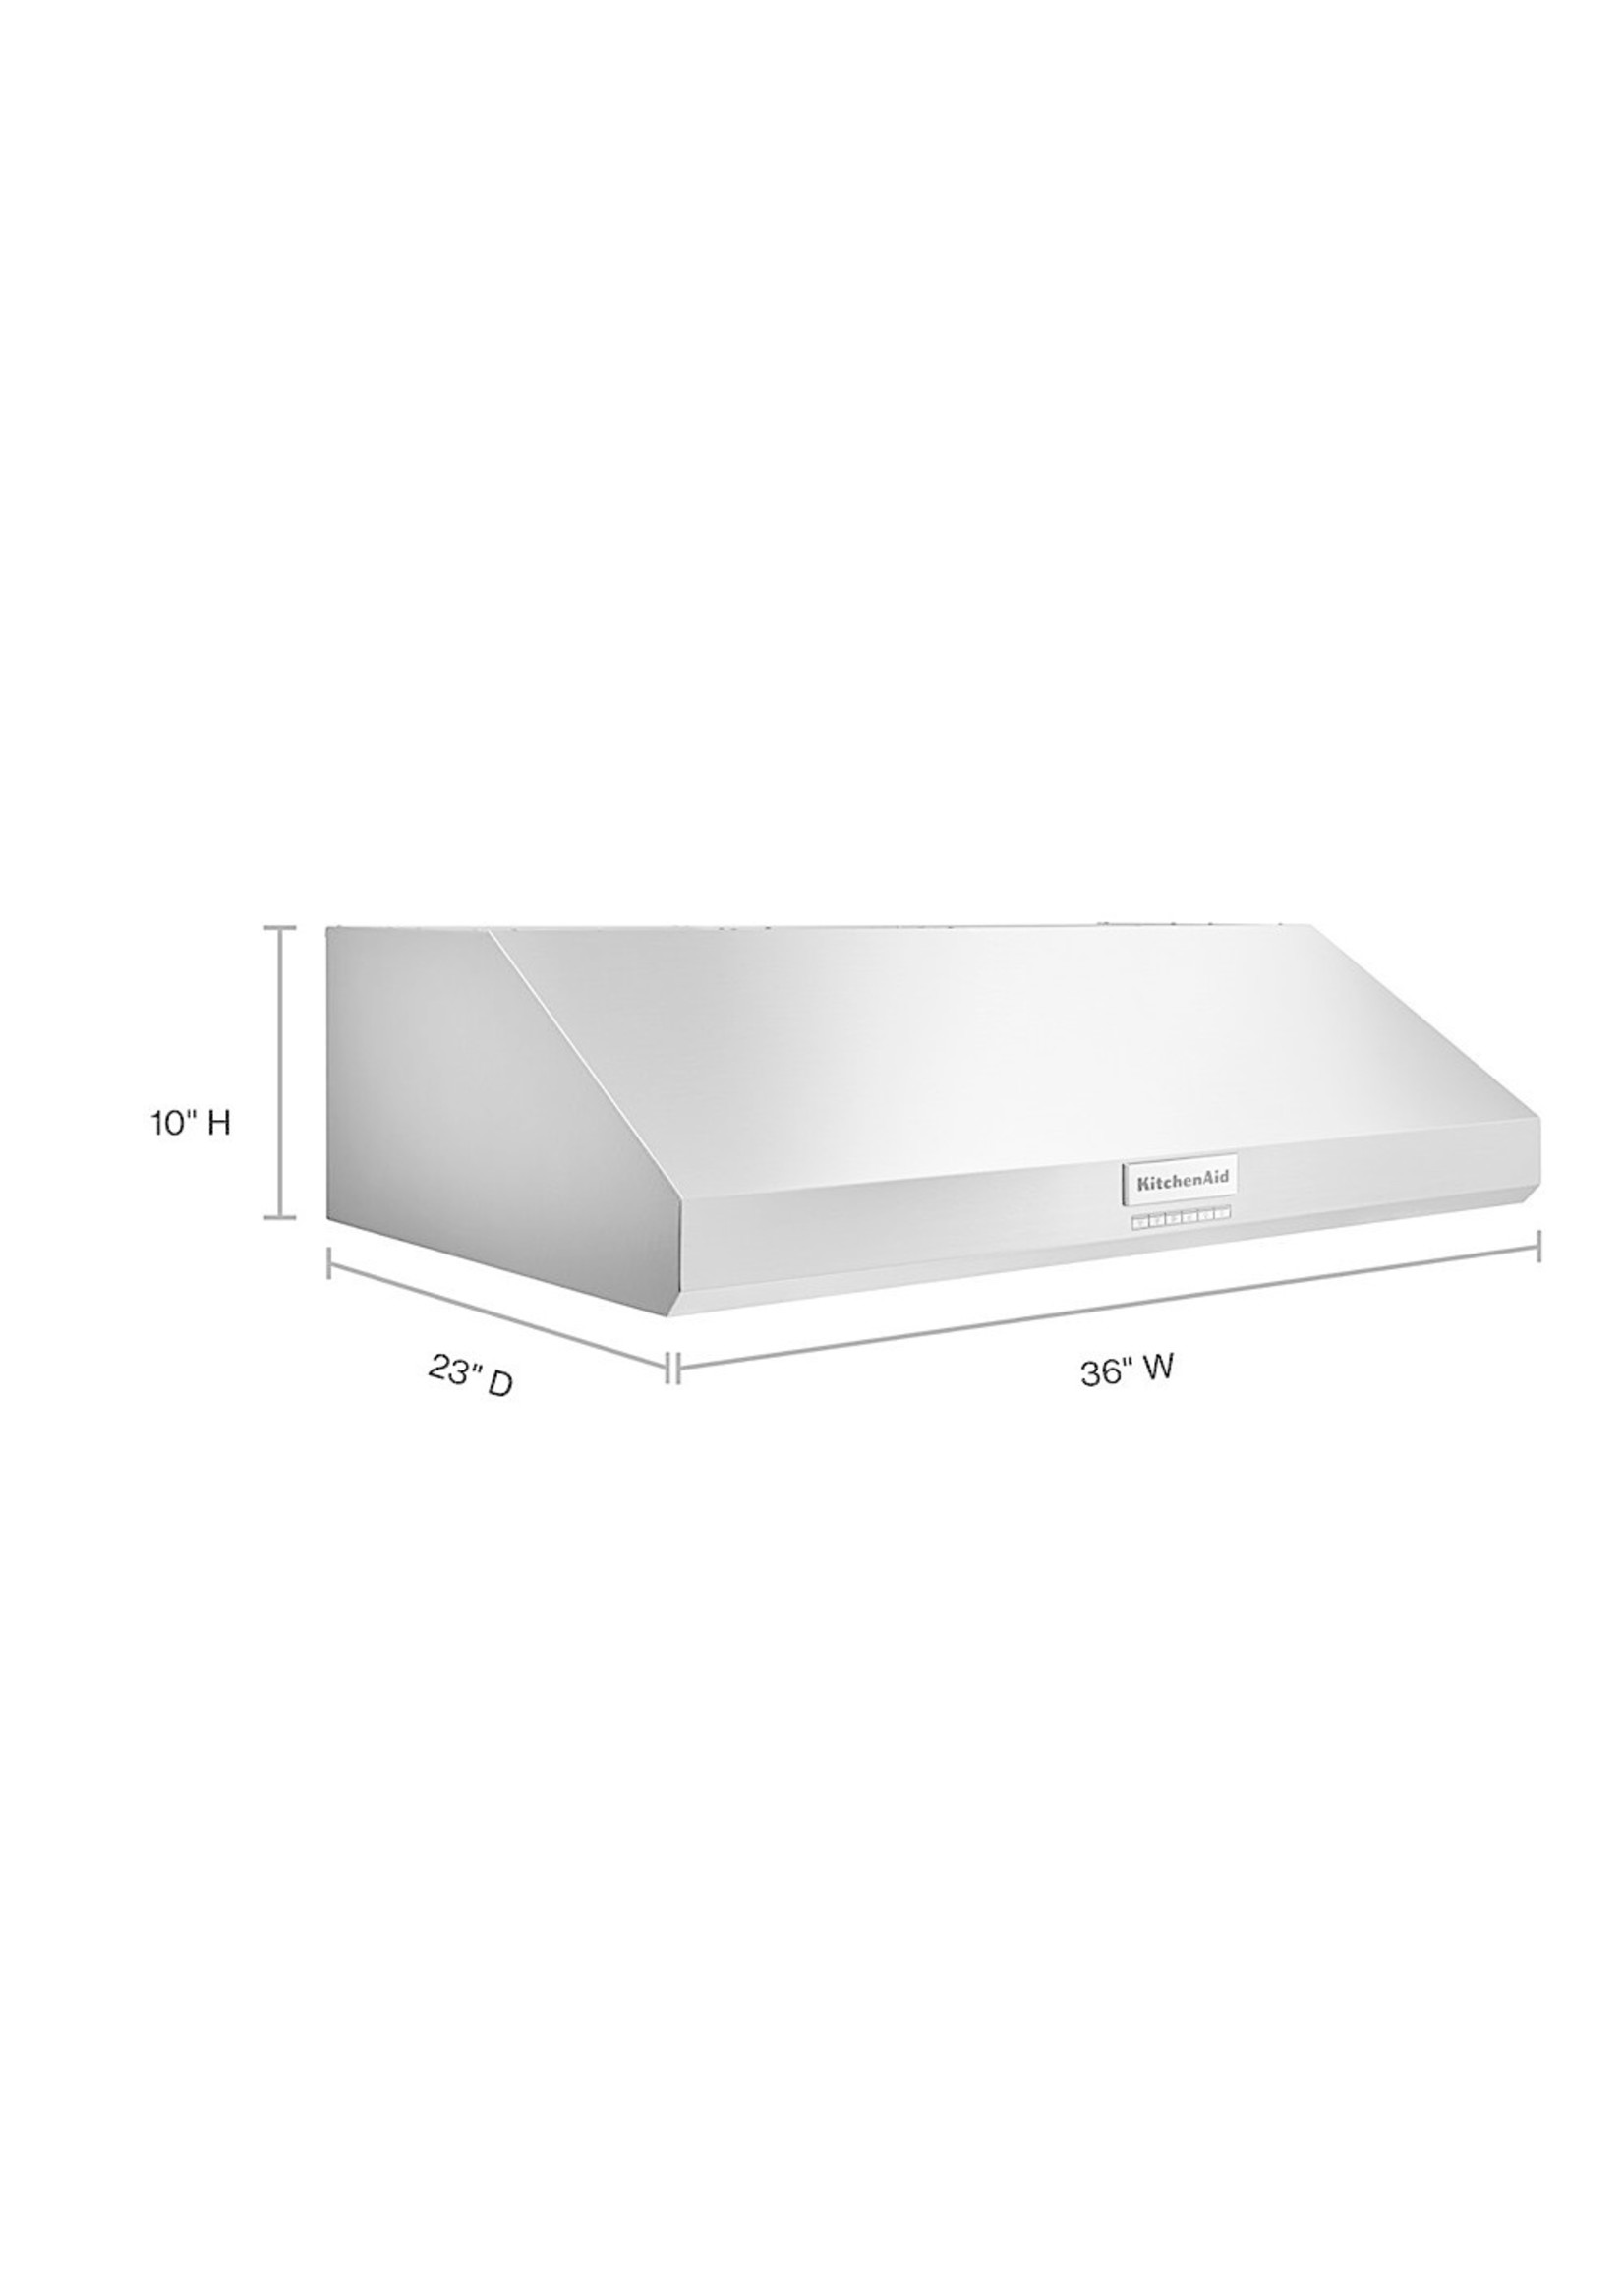 KitchenAid 30 585 CFM Motor Class Commercial-Style Under-Cabinet Range Hood  System Stainless Steel KVUC600KSS - Best Buy